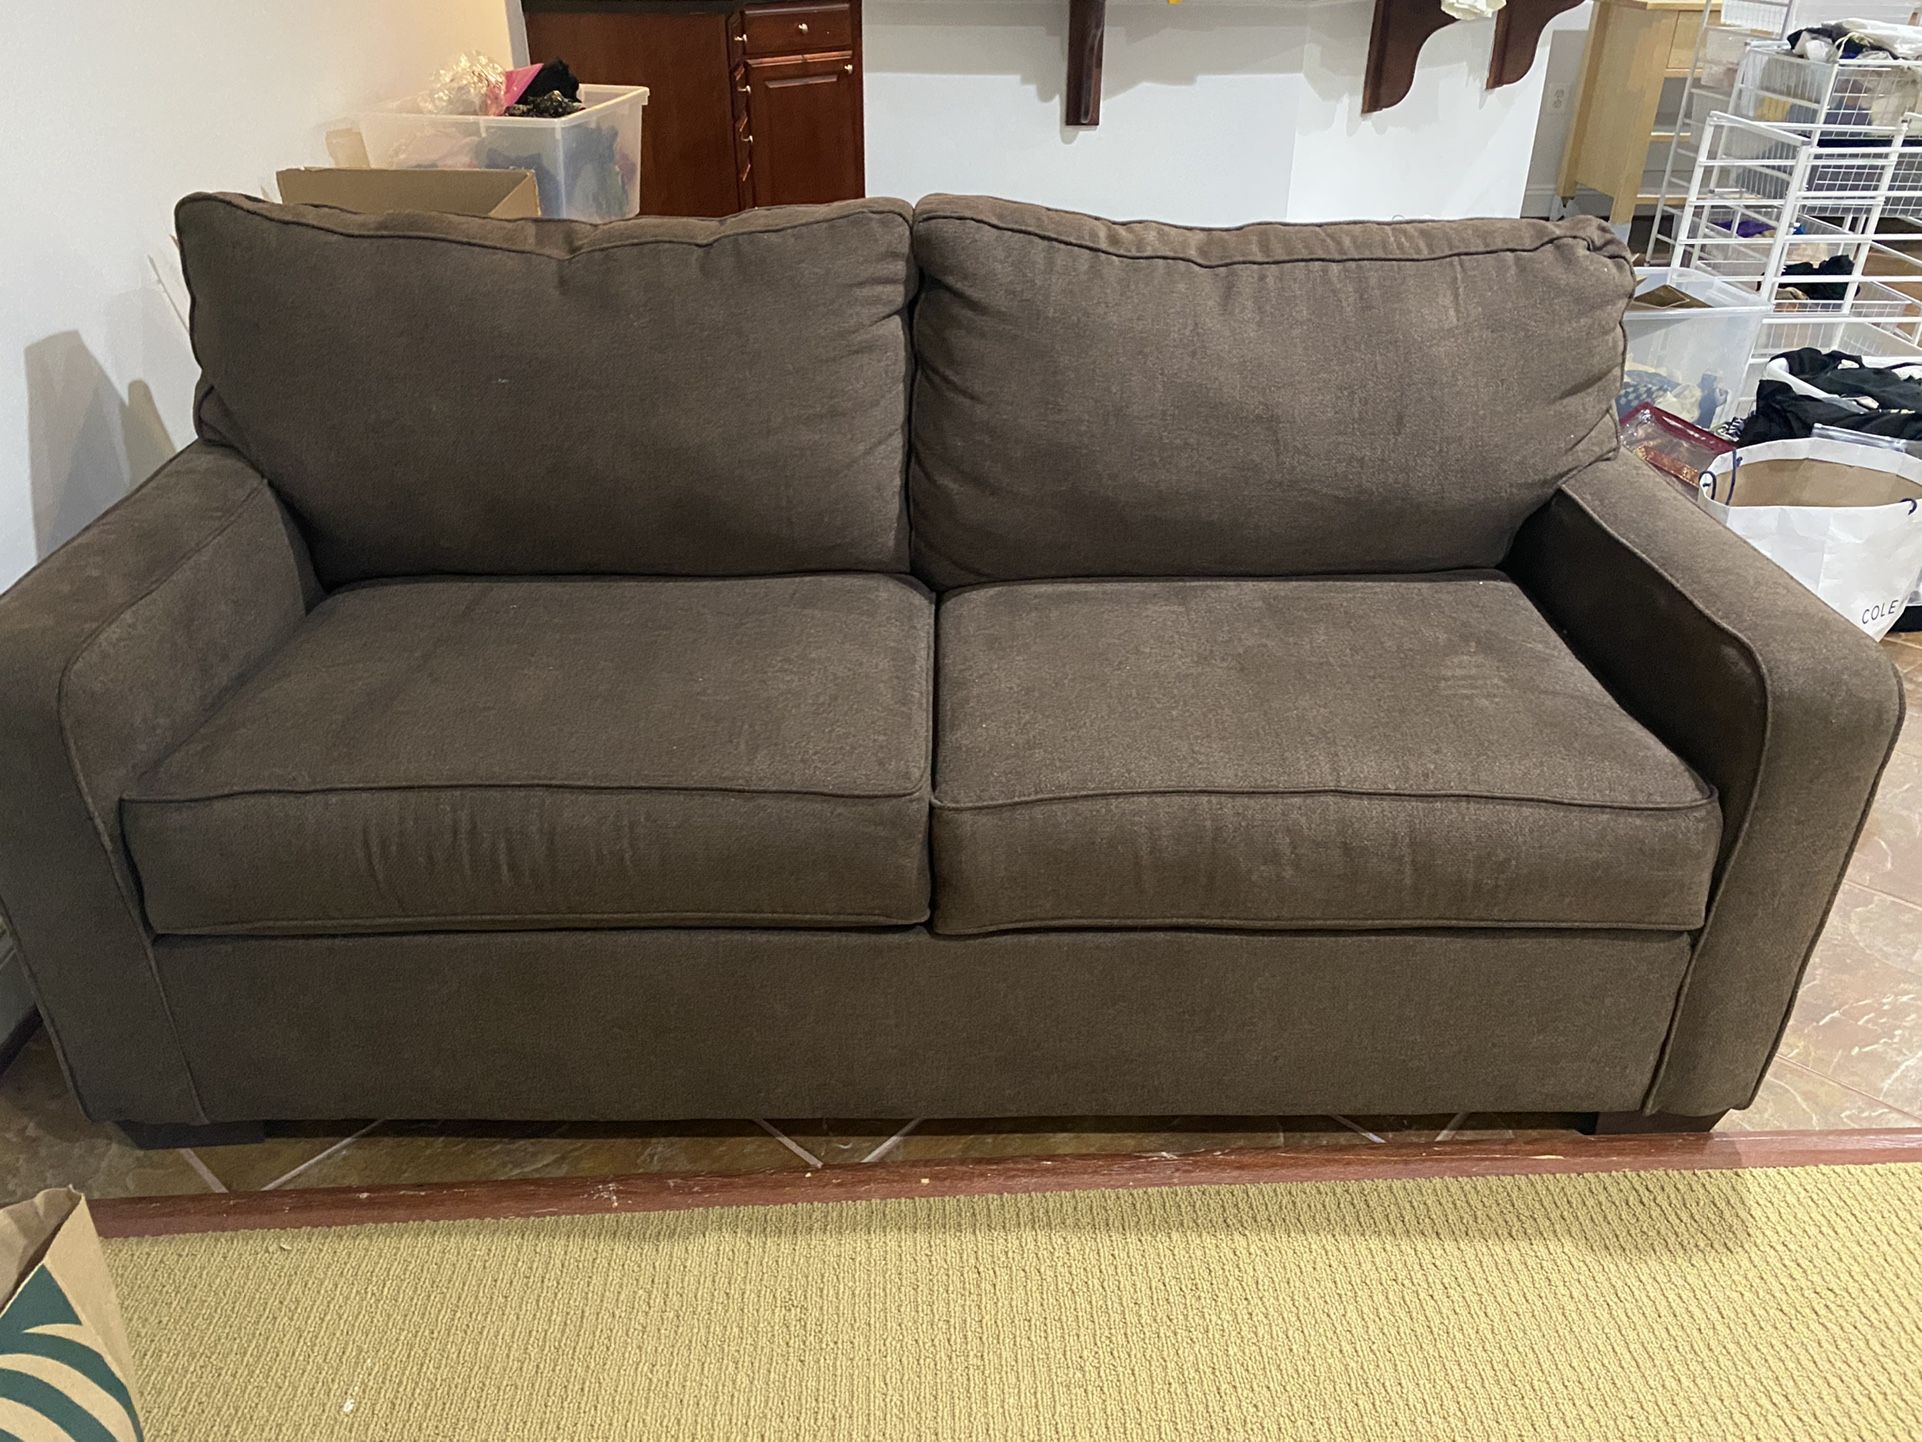 Brand new Sofa With Pull Couch 